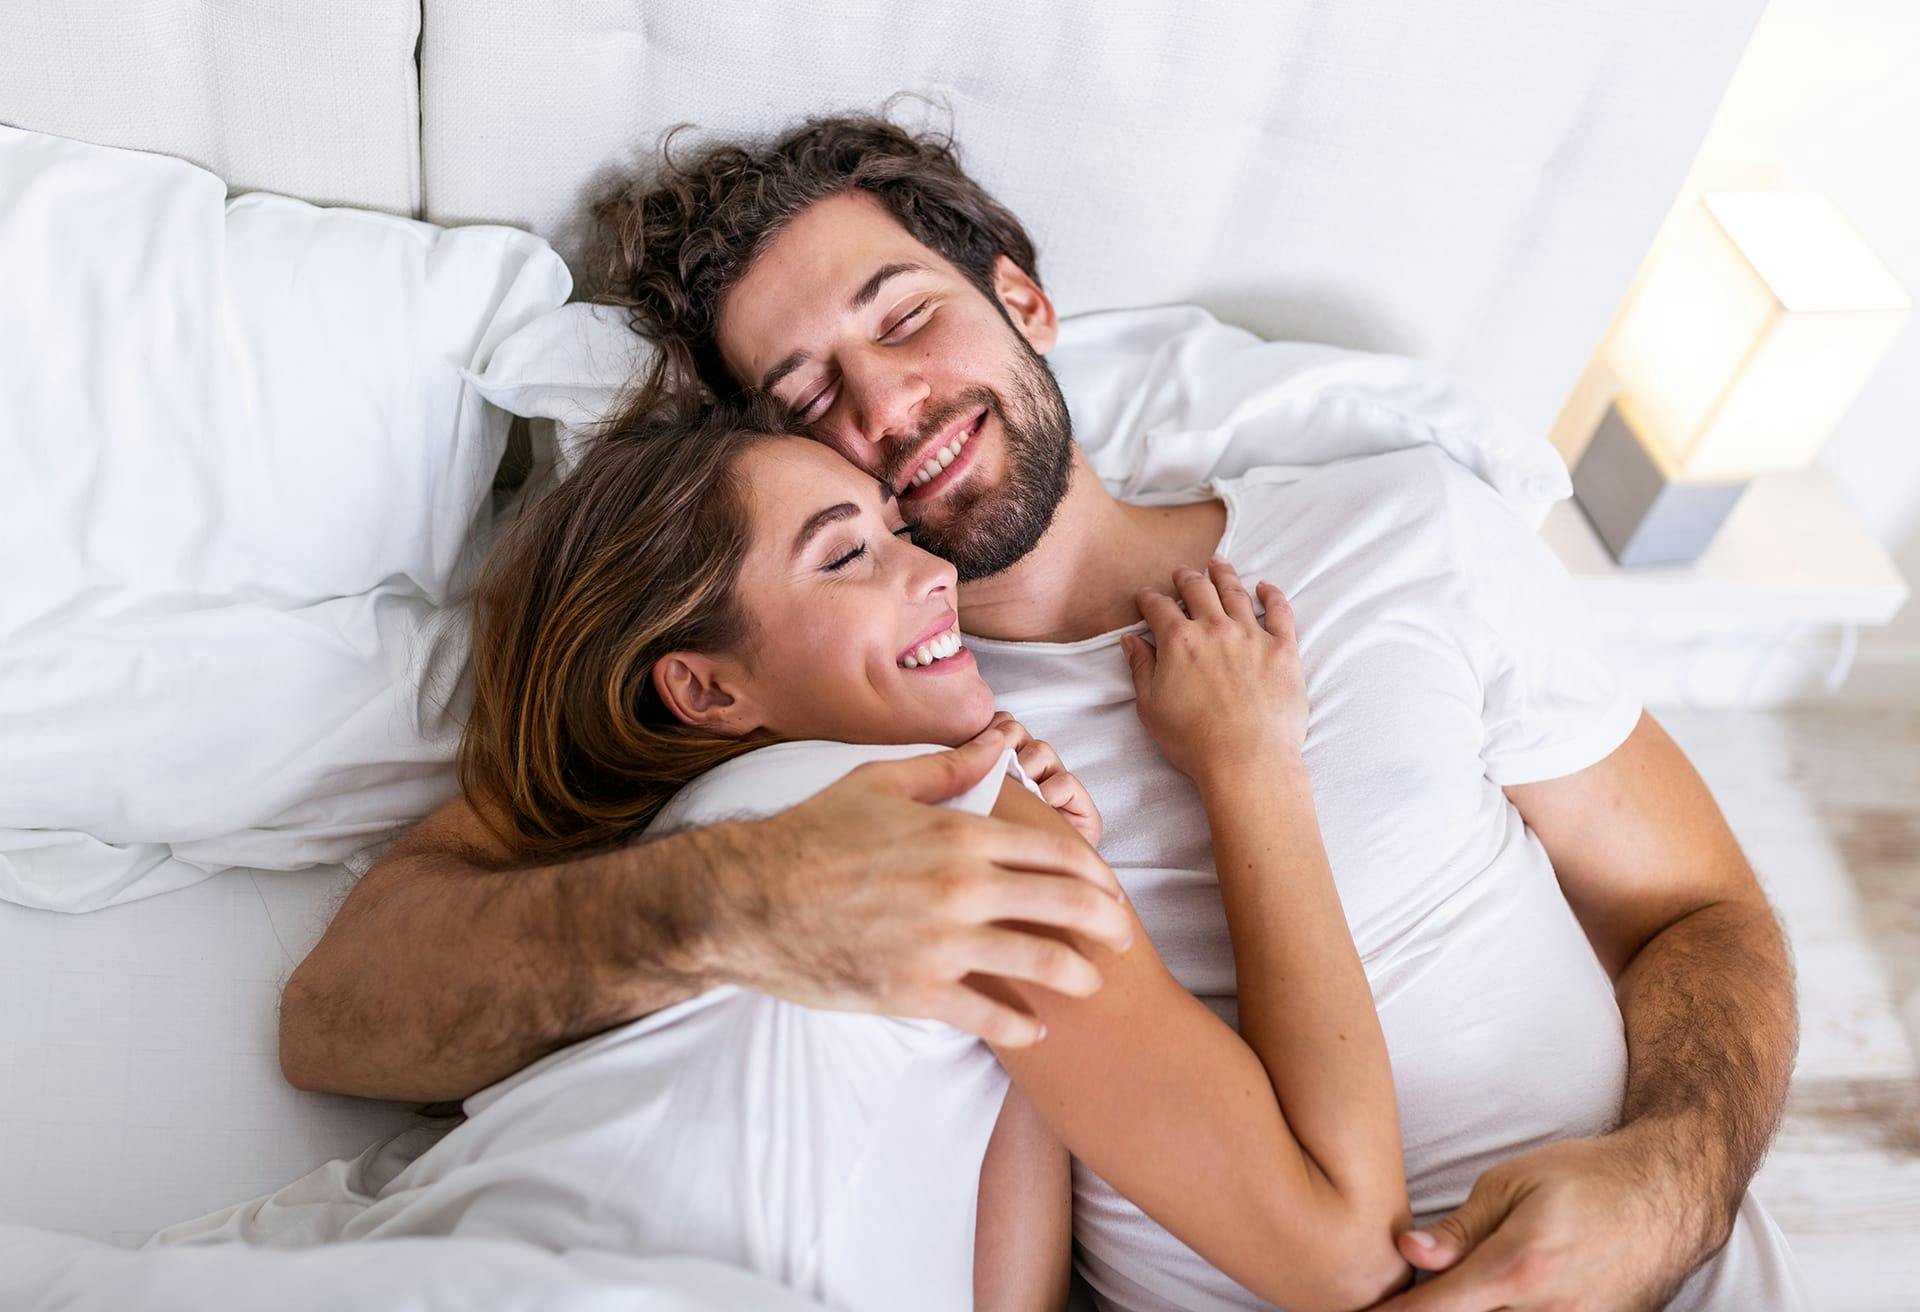 Man and woman in bed together